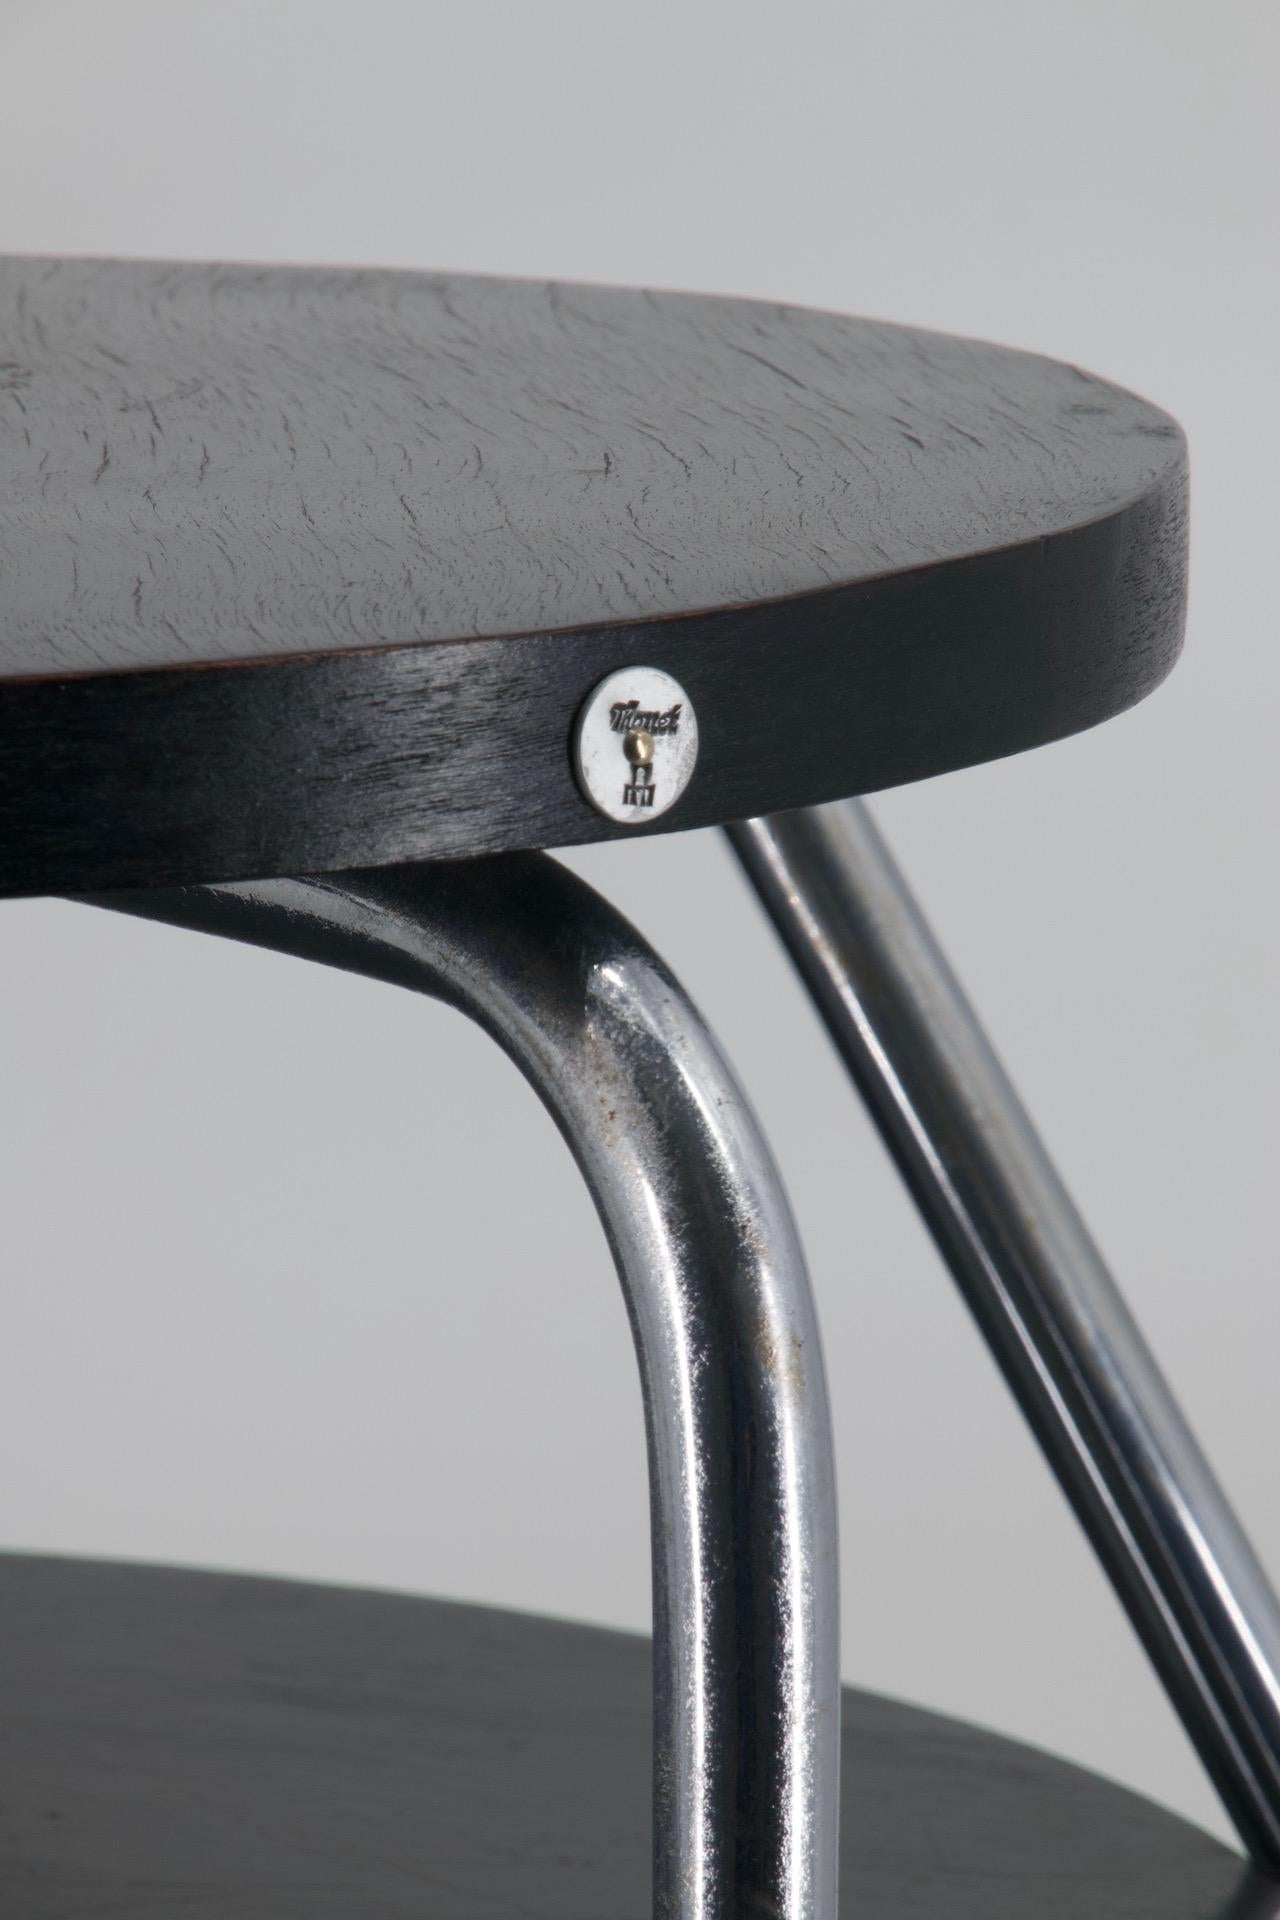 This Thonet 1930s modernist table is the rare model B153, identified in a 1930s Thonet catalogue, see picture. A unique and Avant Garde design with an asymmetric chromed steel tubular structure and two lacquered black wood all in its original